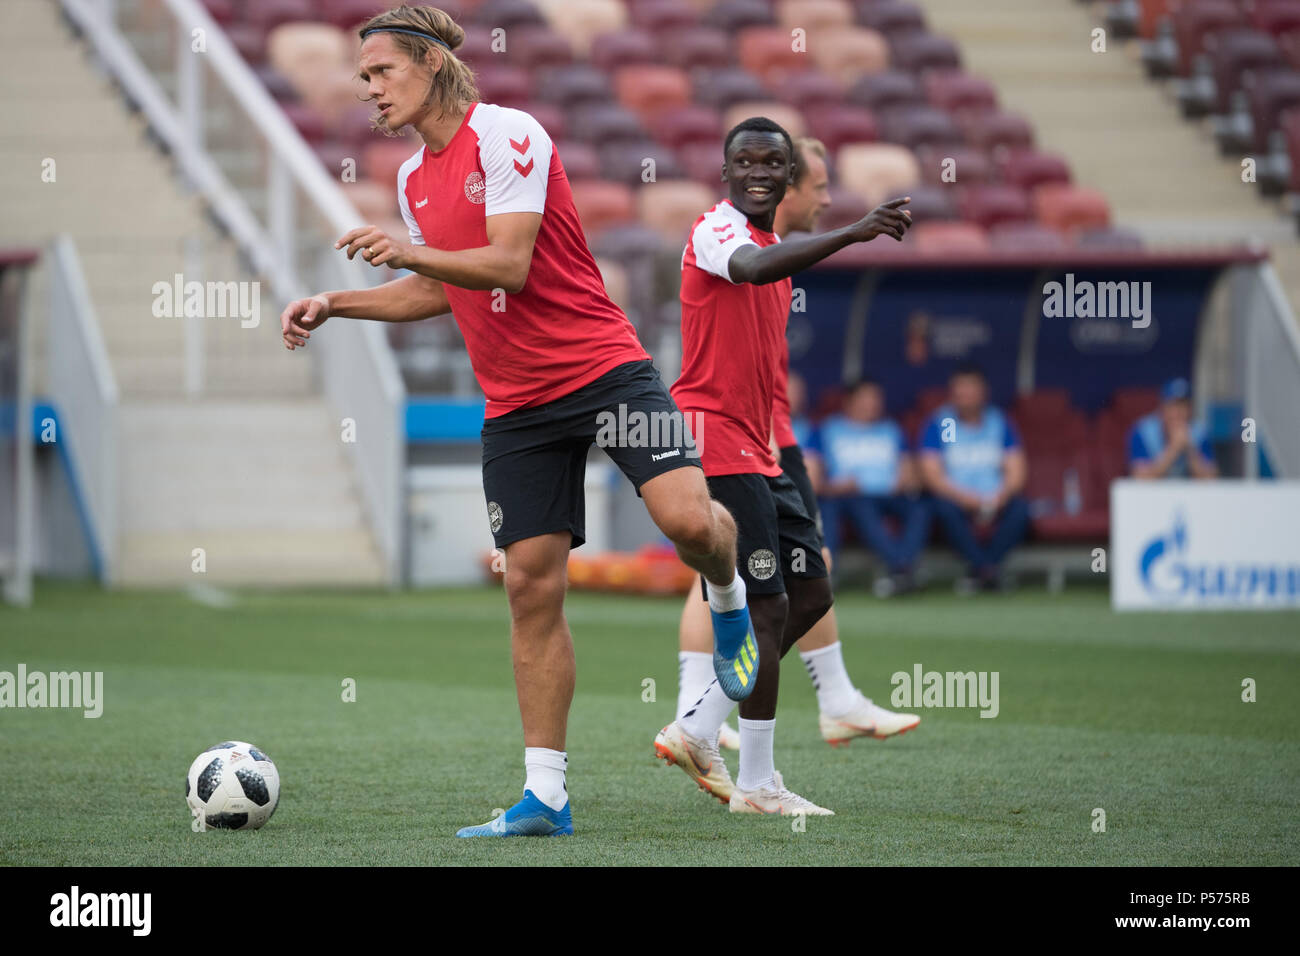 Moscow, Russia. 25th June, 2018. Soccer: FIFA World Cup 2018: Denmark's Jannik Vestergaard (L) and Pione Sisto in action during the training session at the Luzhniki Stadium. Credit: Federico Gambarini/dpa/Alamy Live News Stock Photo